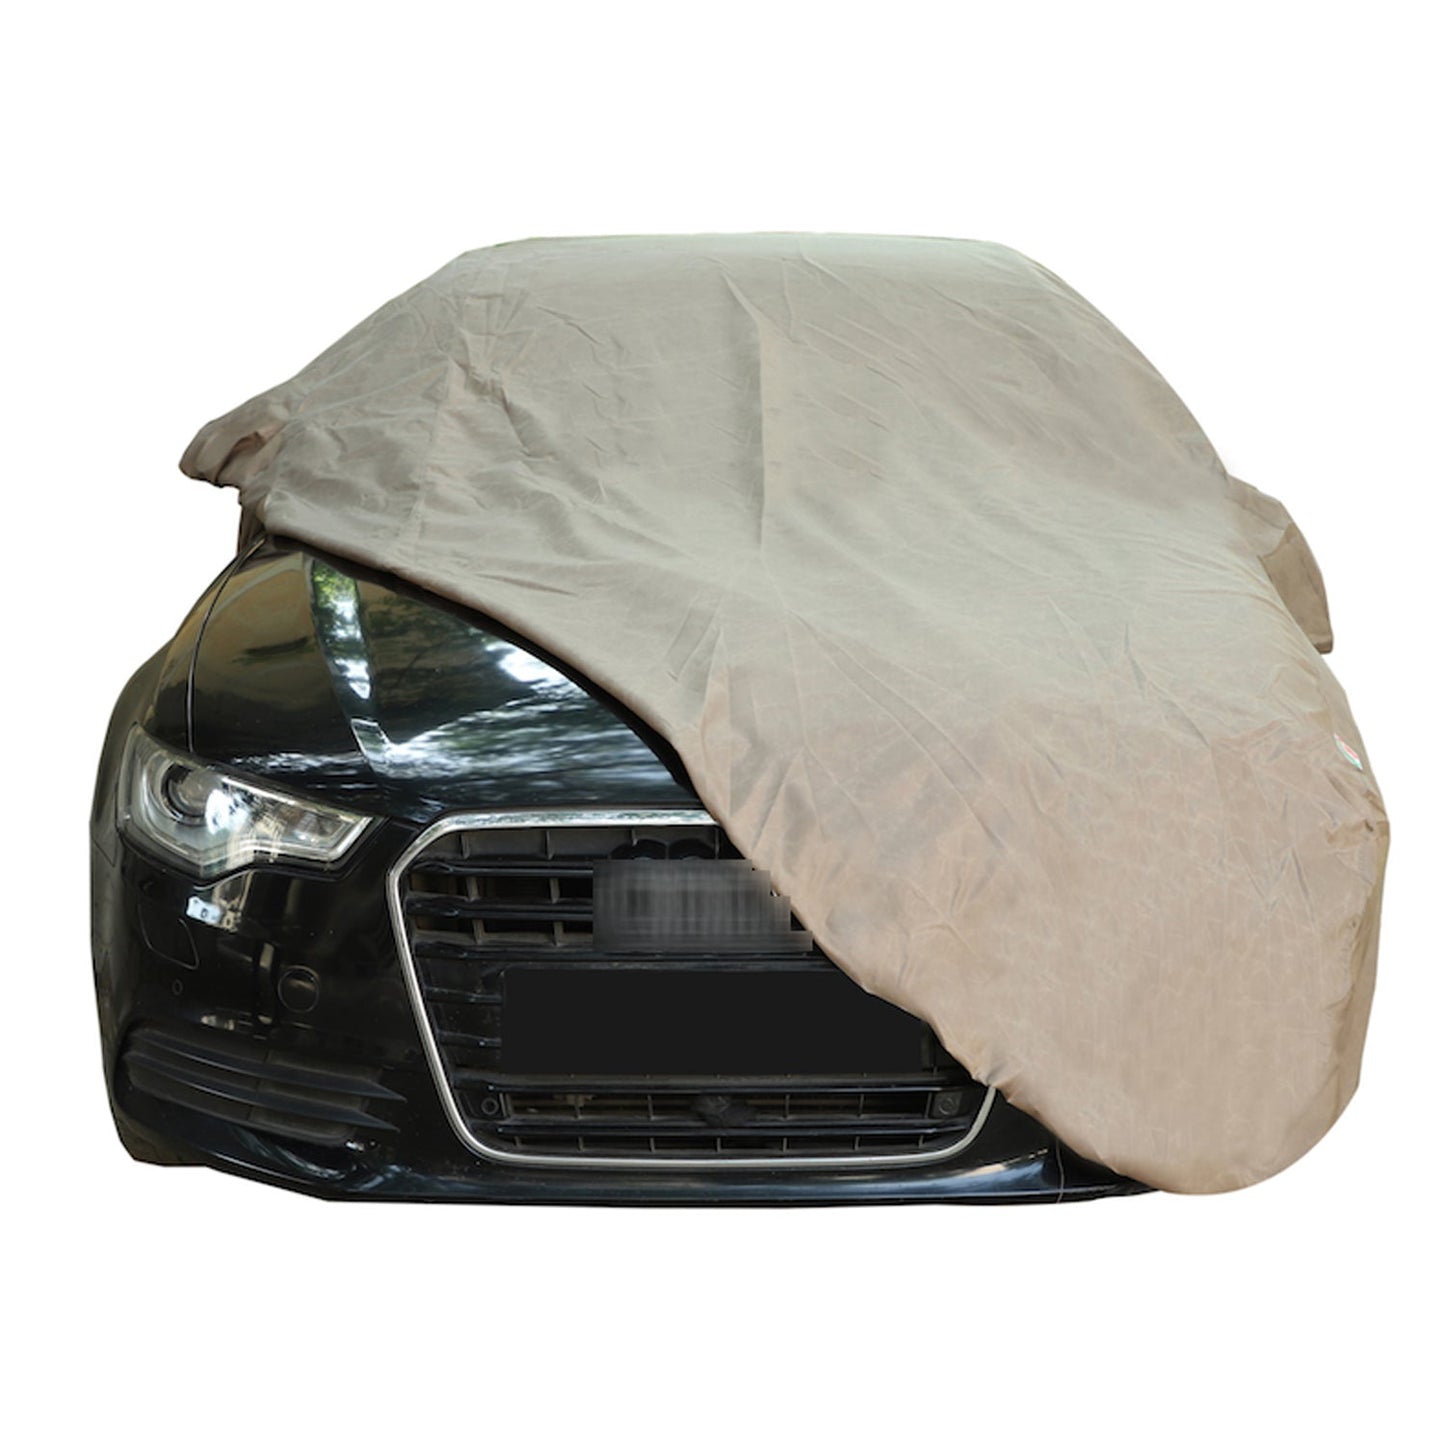 Oshotto Brown 100% Waterproof Car Body Cover with Mirror Pockets For Hyundai Eon